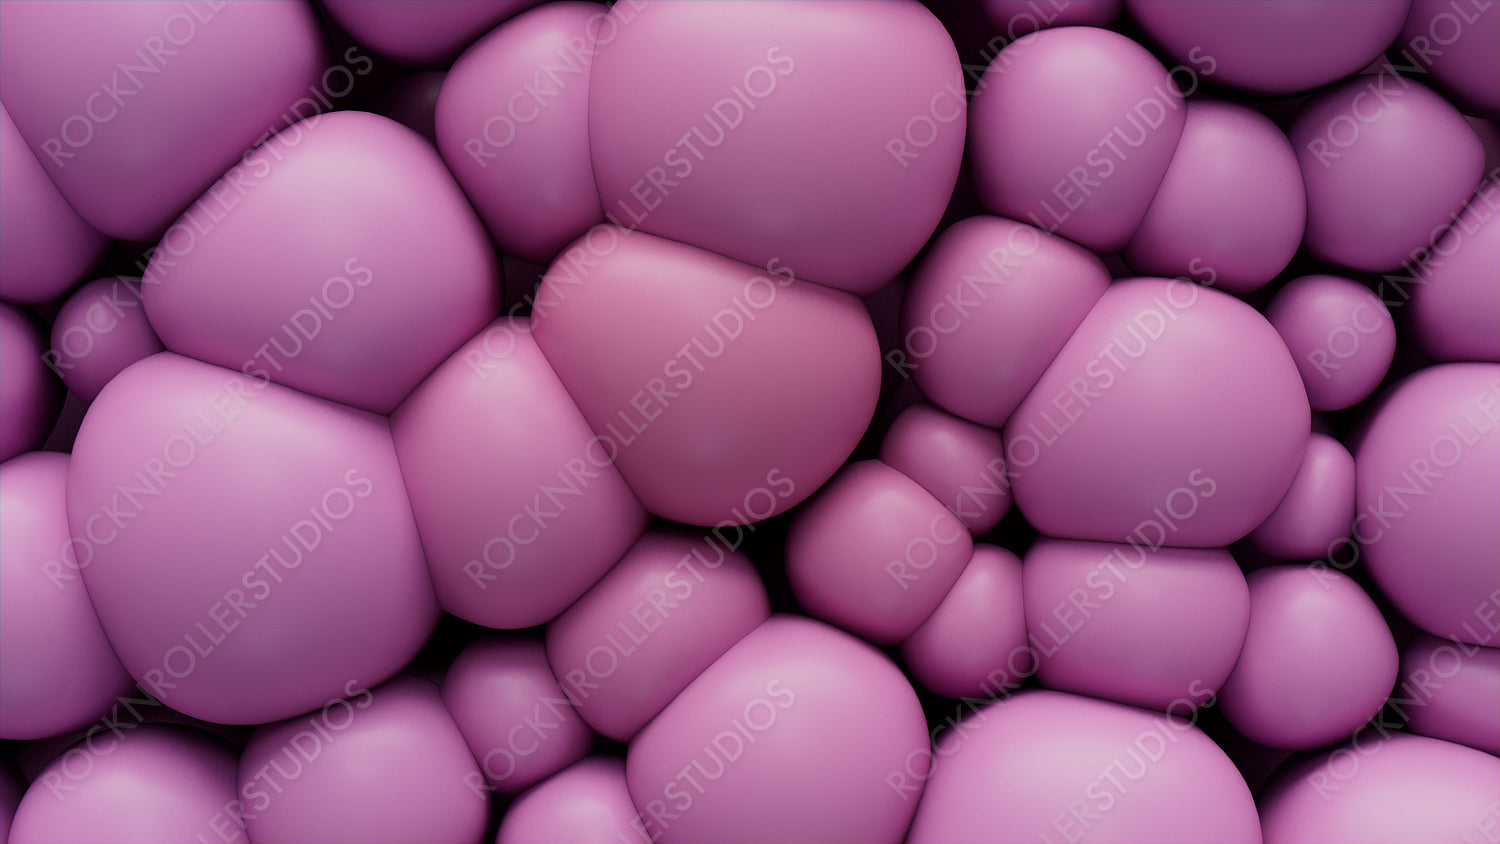 Abstract background made of Pink 3D Soft Shapes. Colorful 3D Render.  